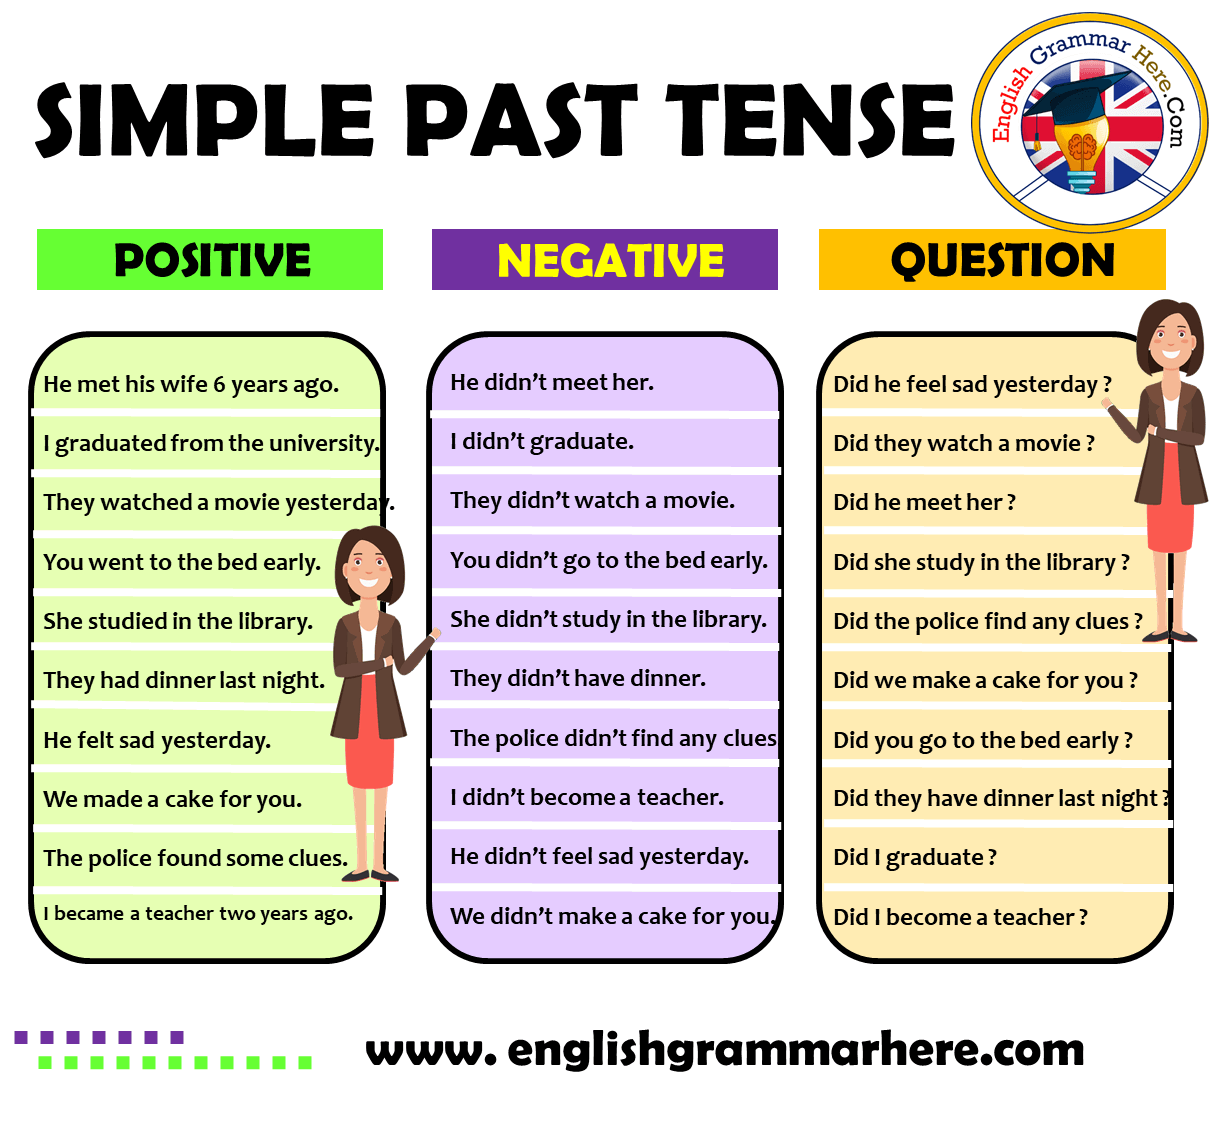 Simple Past Tense Positive Negative Question Examples English Grammar Here